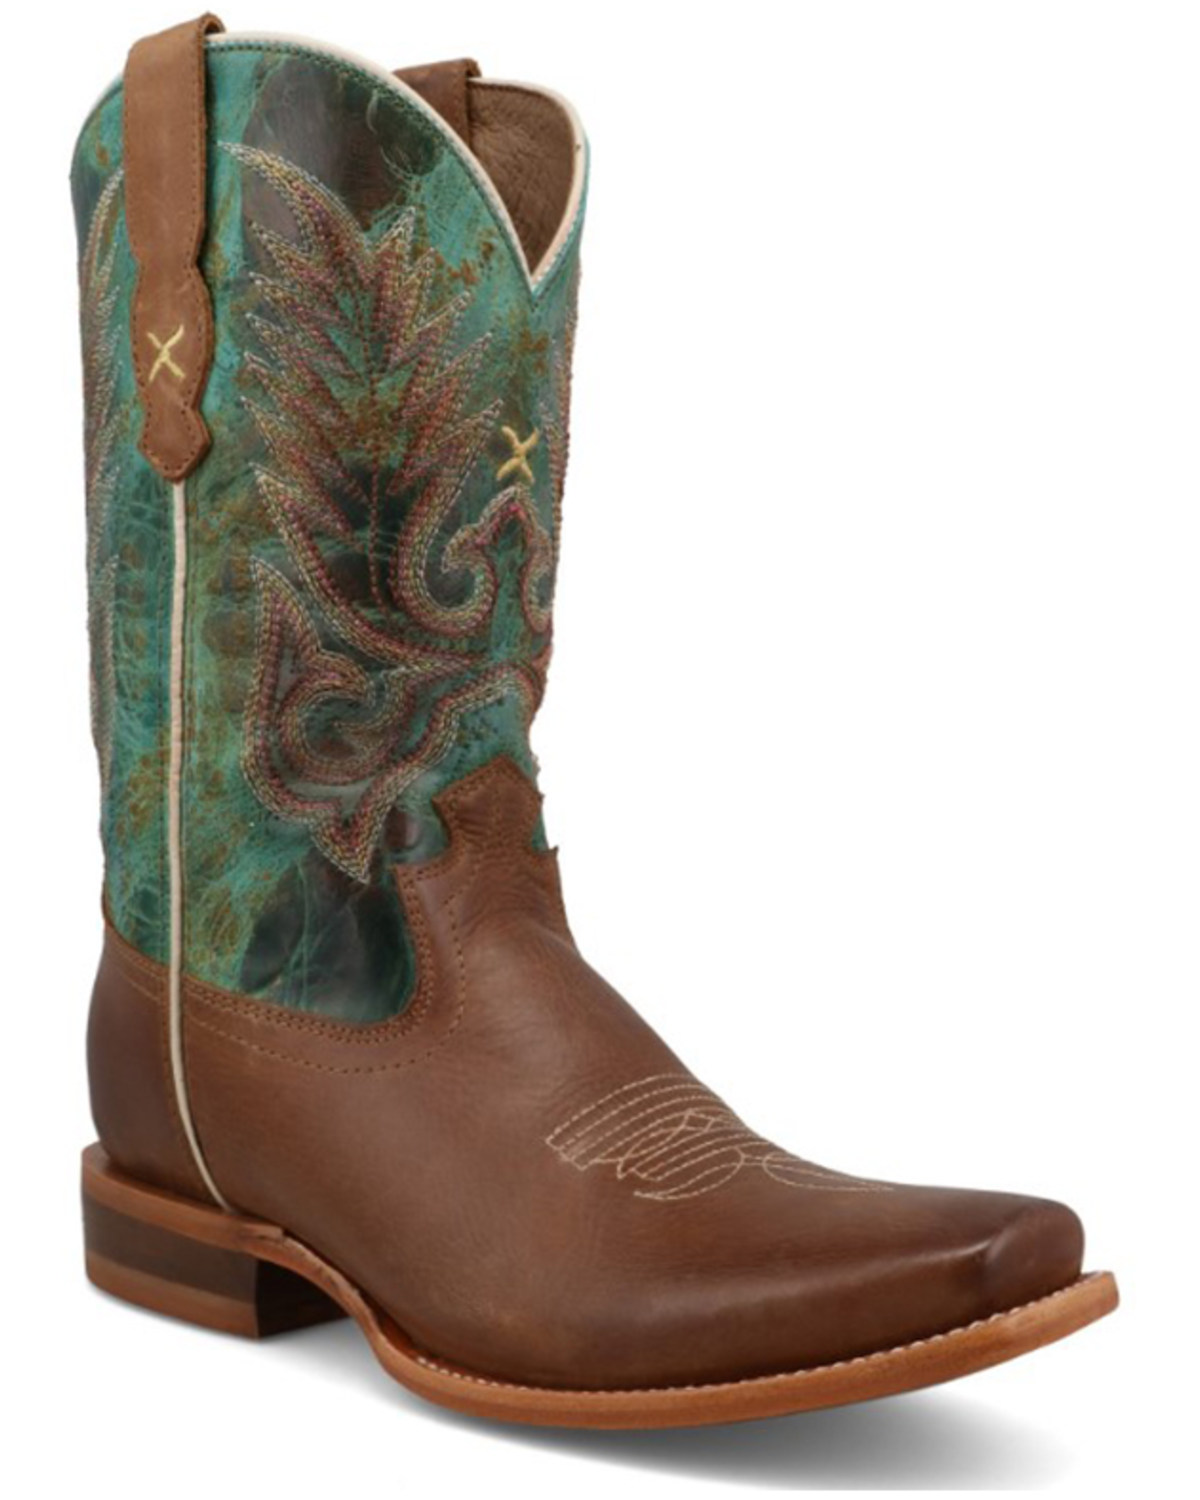 Twisted X Women's Rancher Western Boots - Square Toe